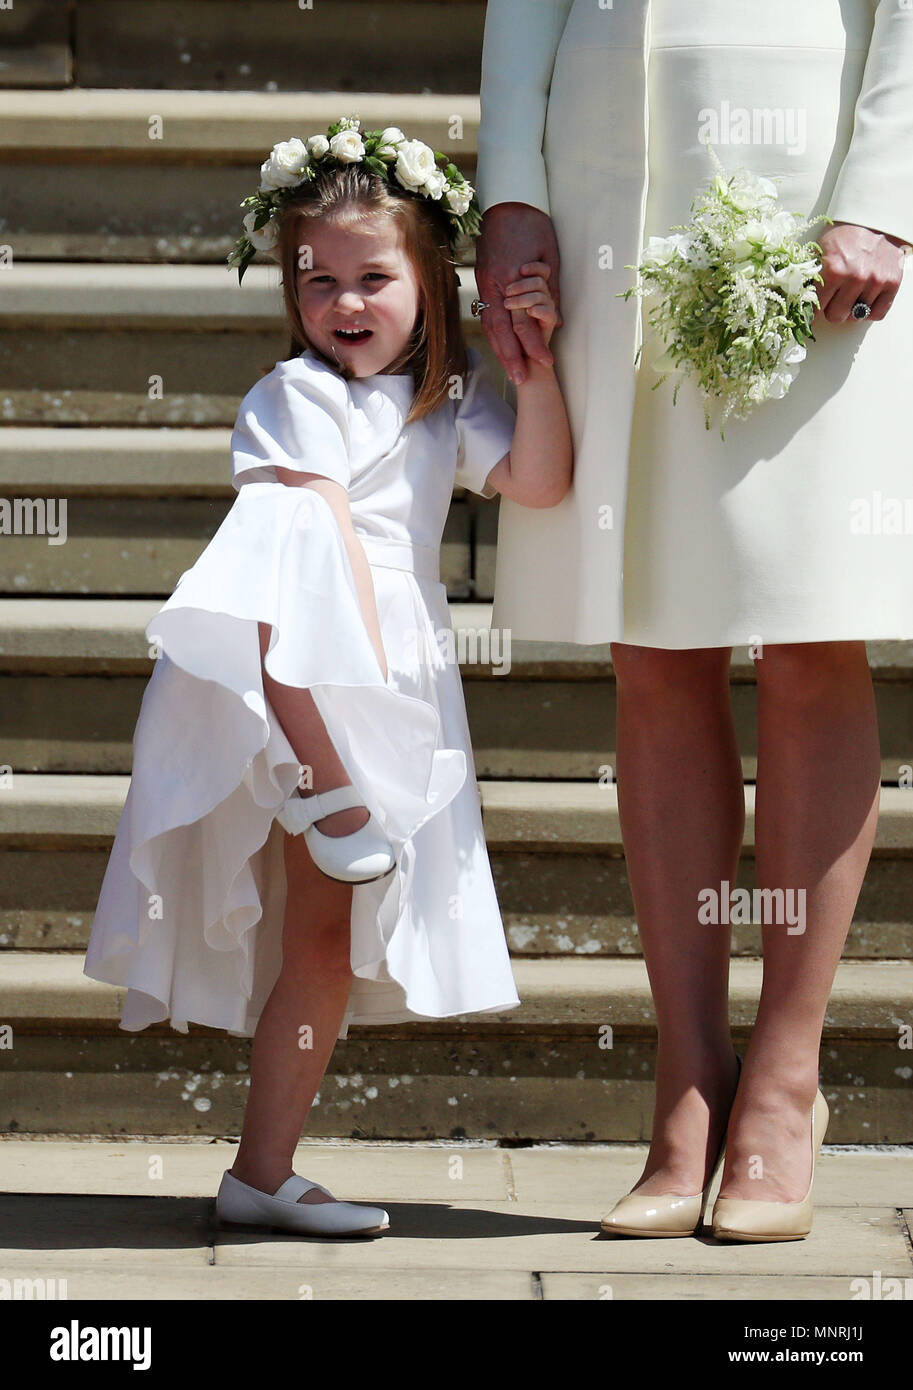 Princess Charlotte on the steps of St George's Chapel in Windsor